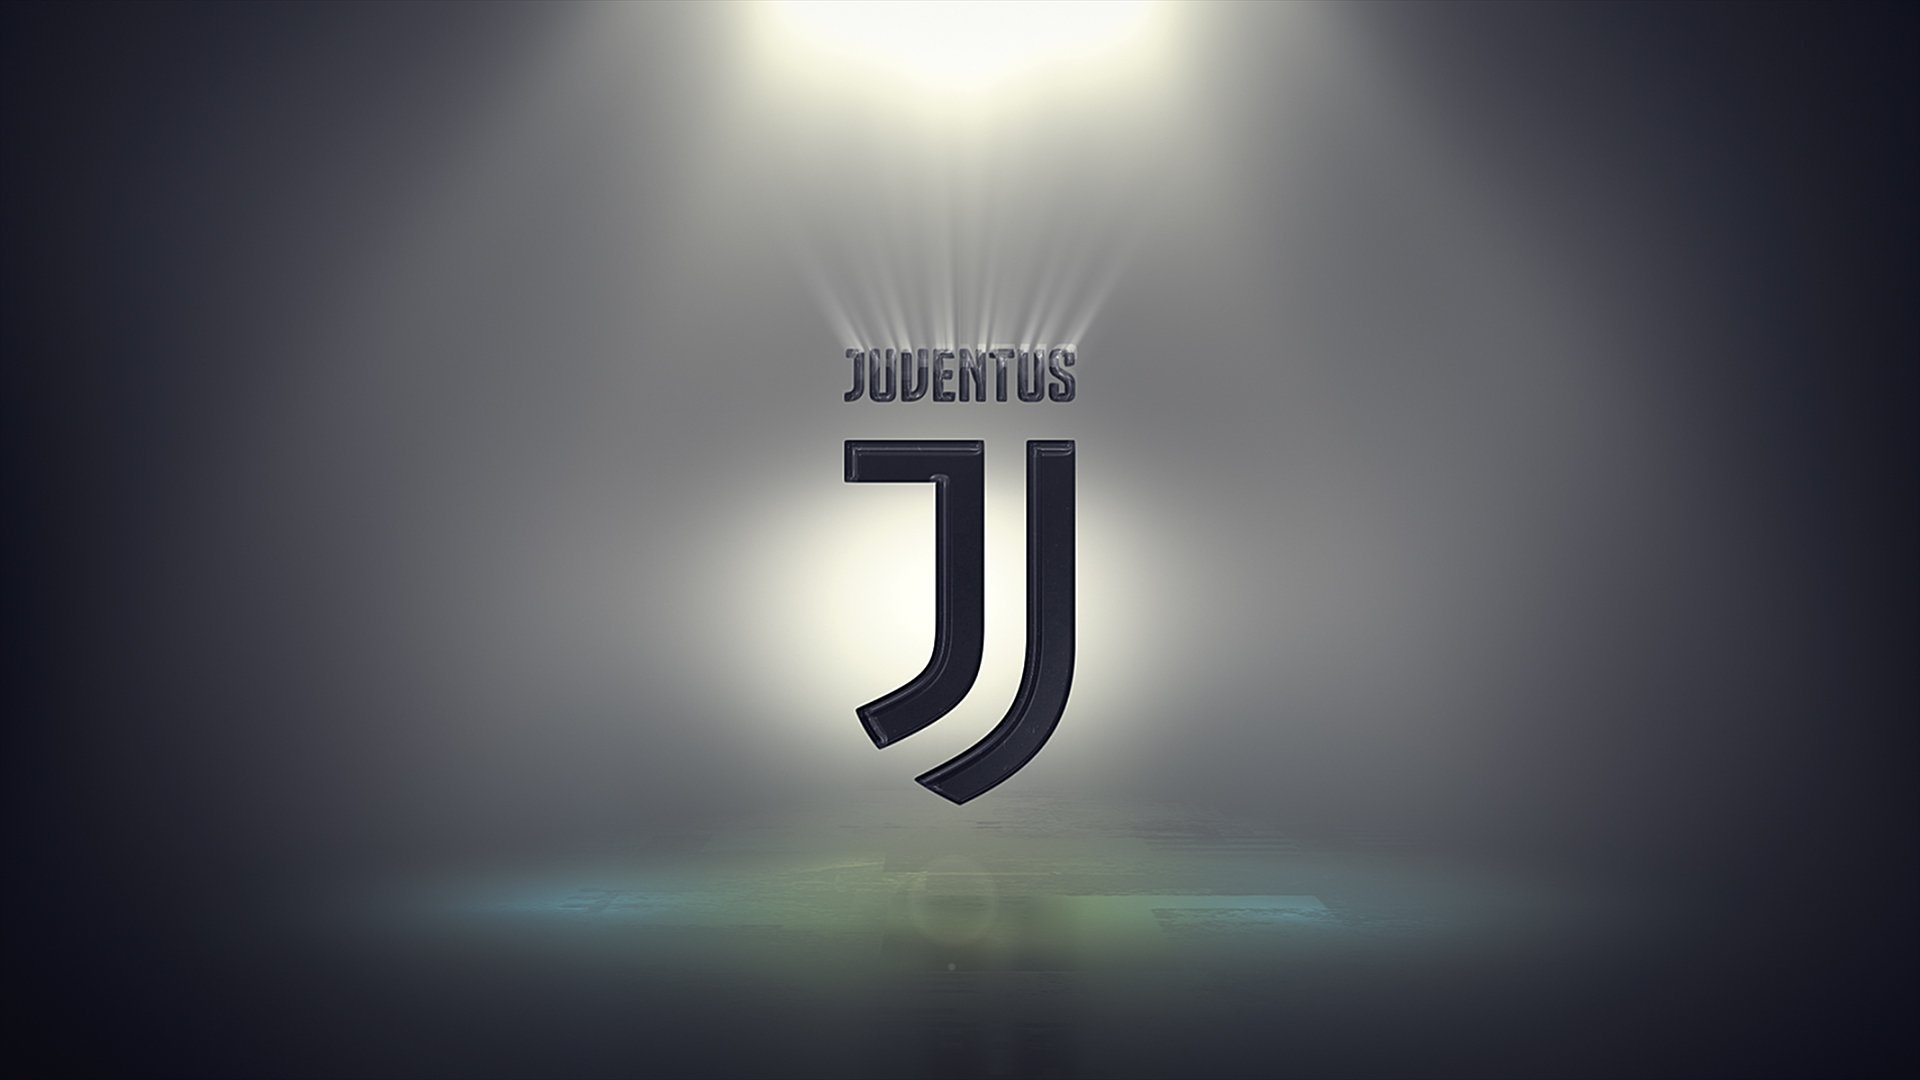 Juventus: The club has won more Italian Football Championship/Serie A championships than any other team. 1920x1080 Full HD Background.